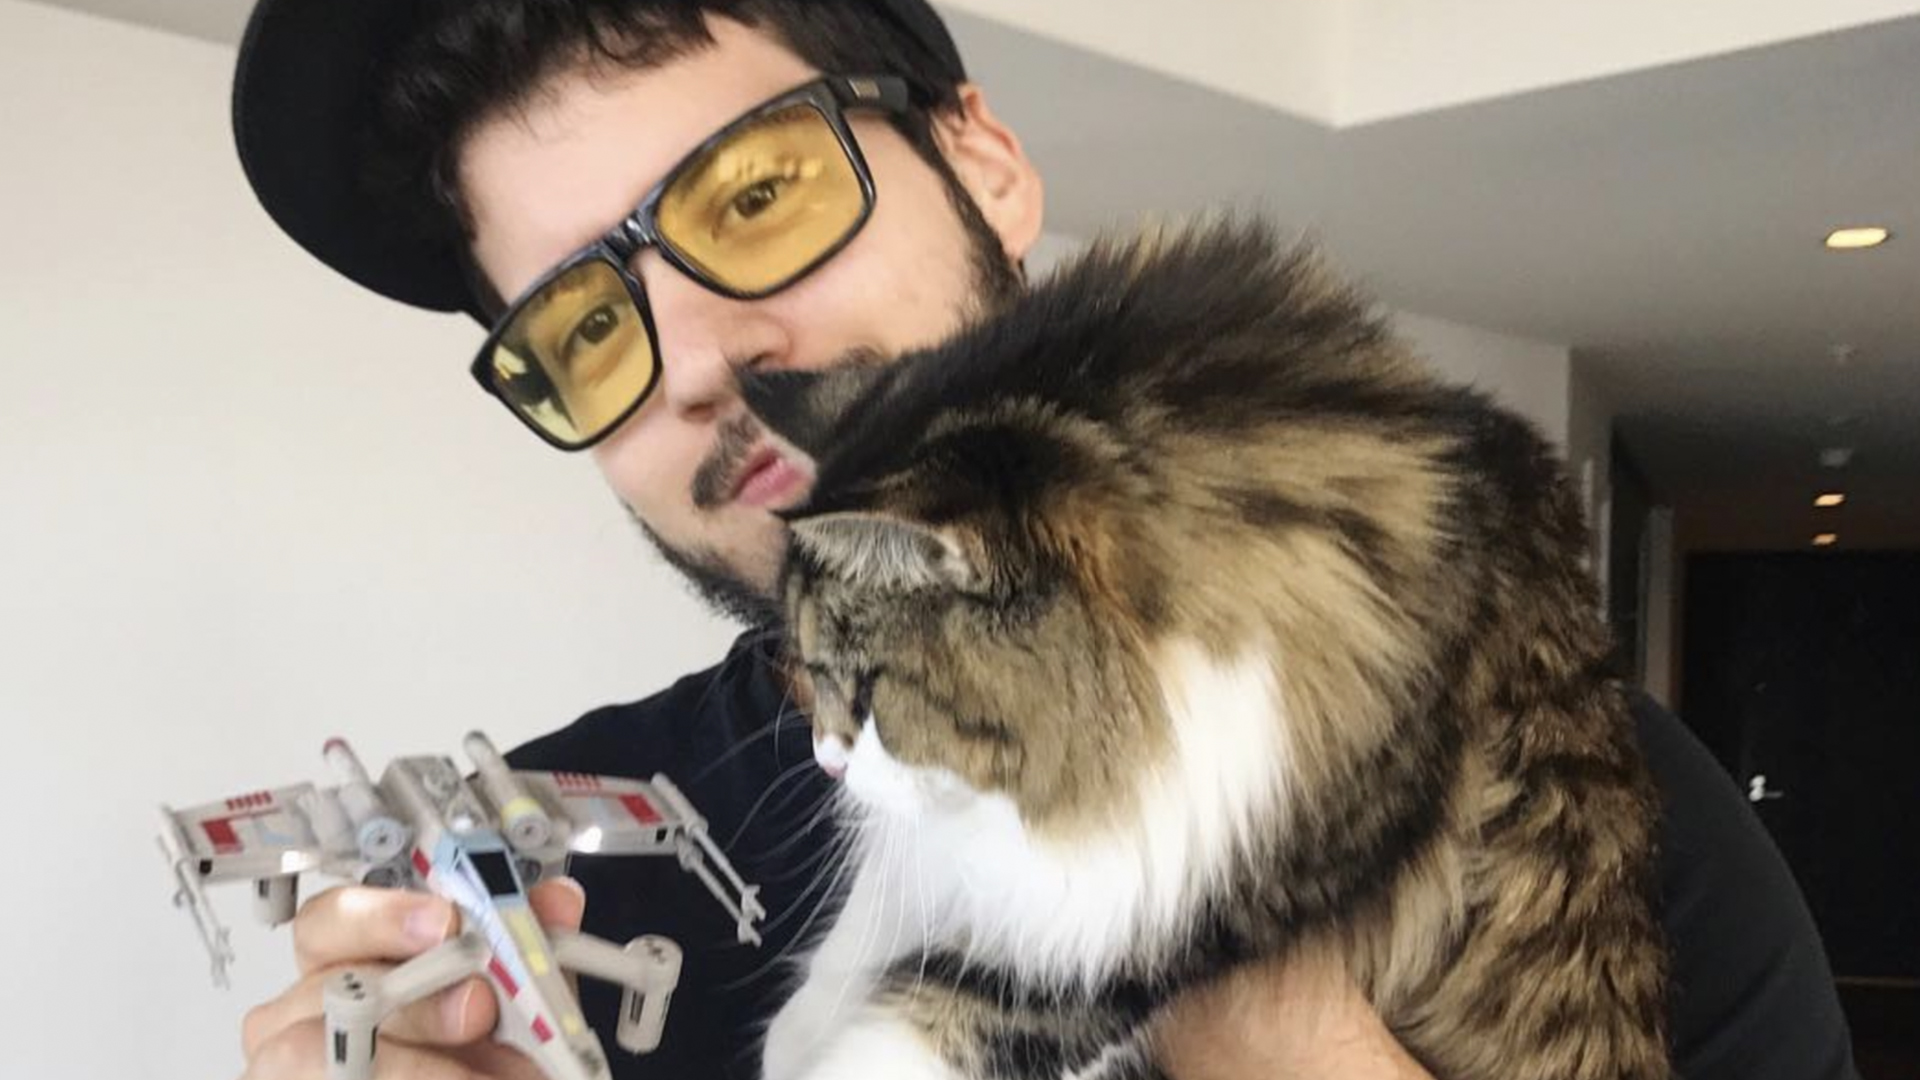 Typical Gamer and a fluffy cat